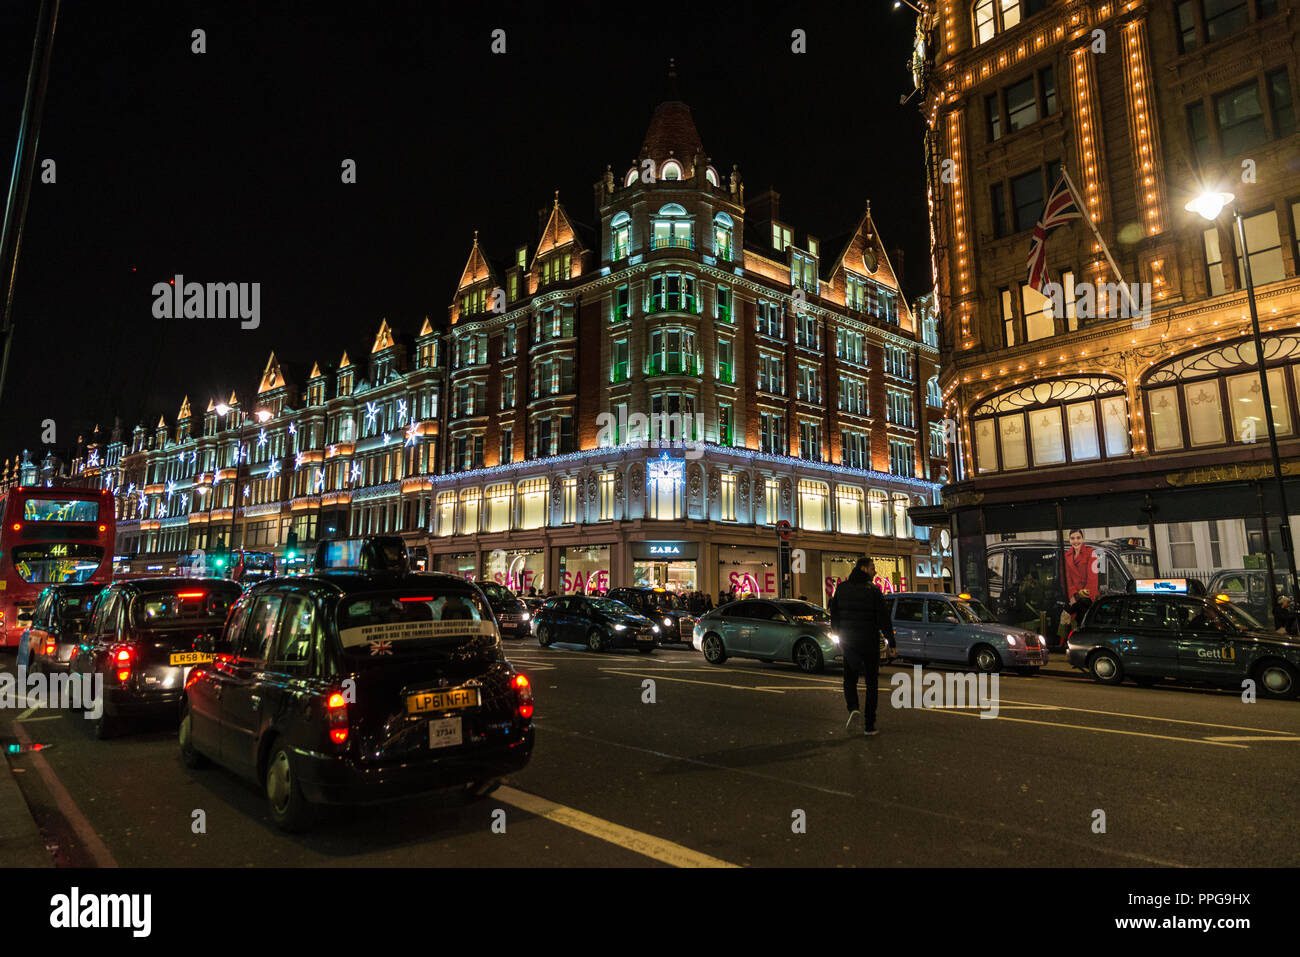 London, United Kingdom - January 3, 2018: Street of the luxurious district of Knightsbridge at night with Christmas decoration with people around in L Stock Photo